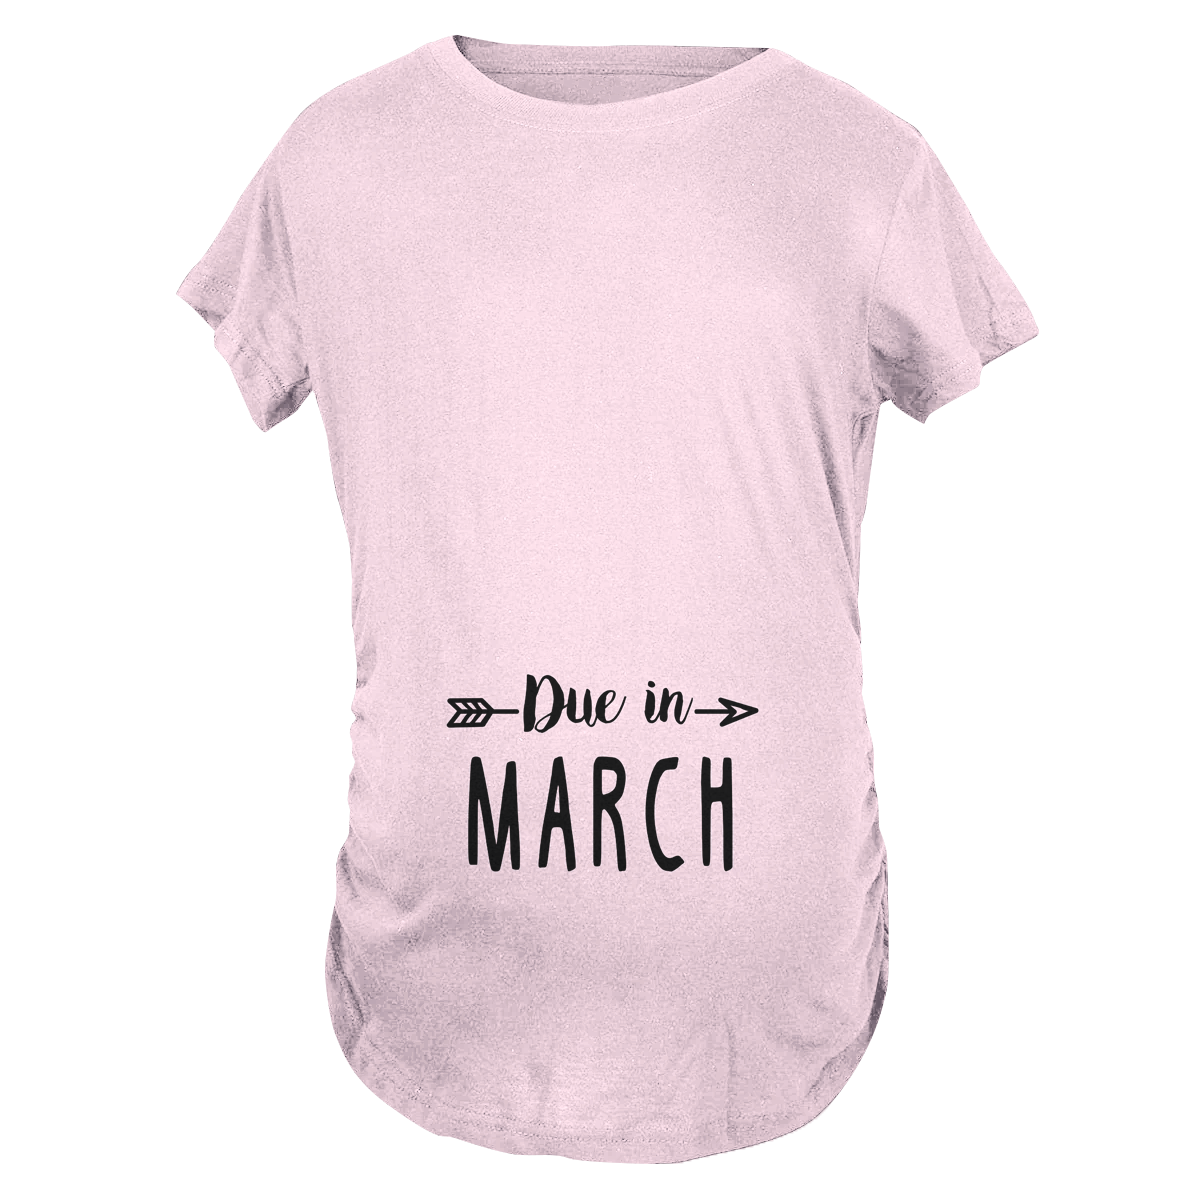 Due in March Maternity T-Shirt